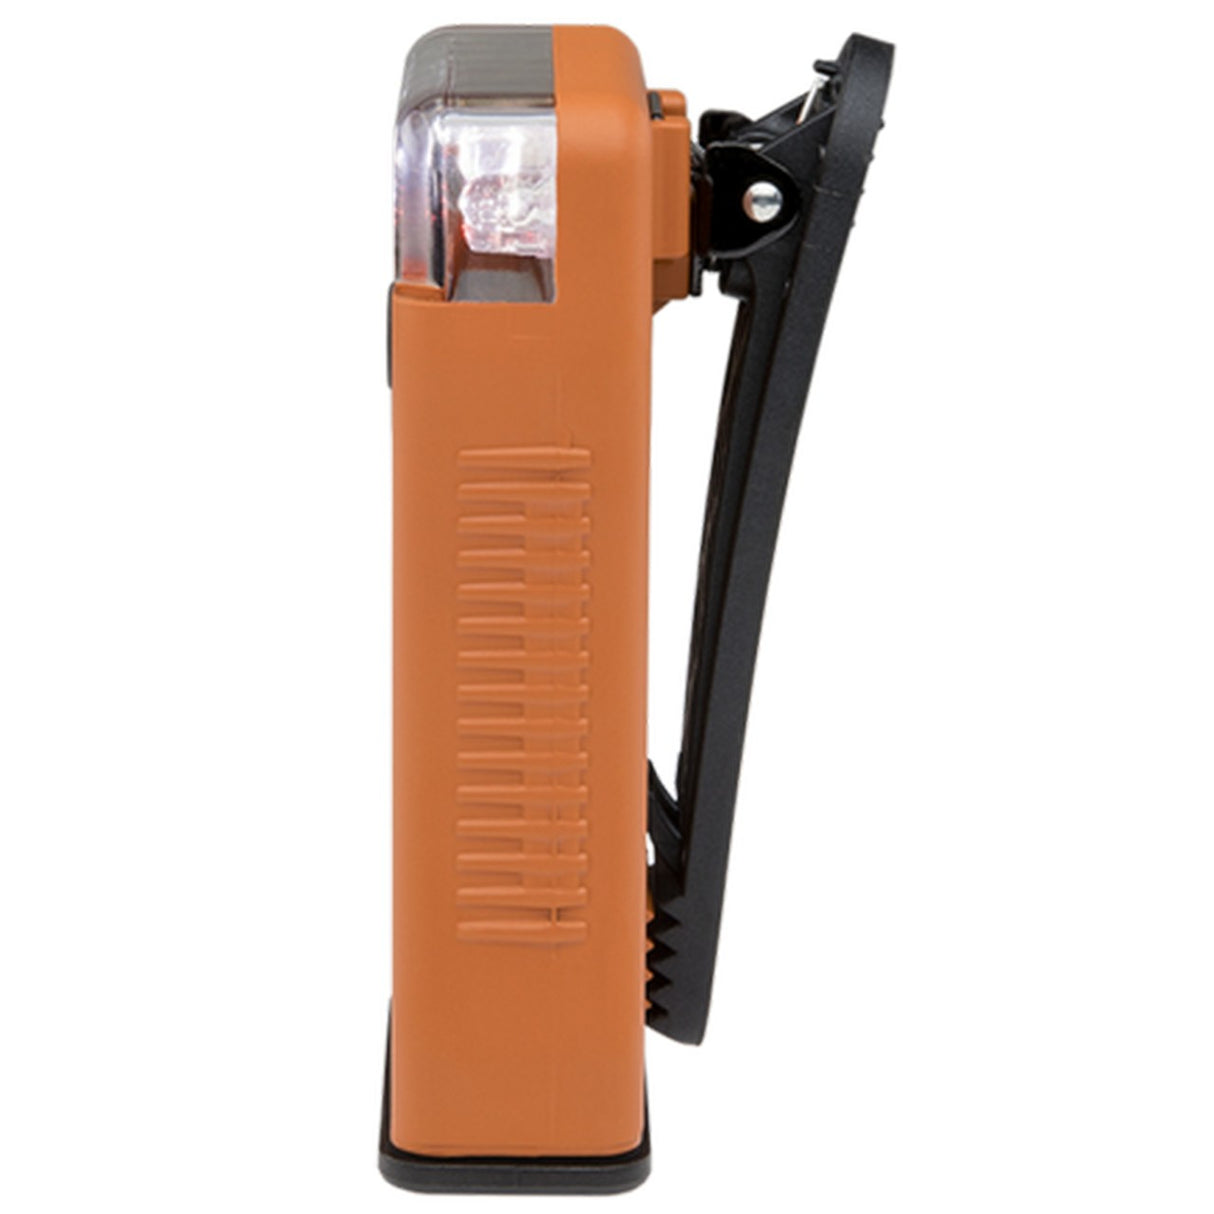 FoxFury 302-004 | Scout Clip Light in Orange with White and Red LEDs